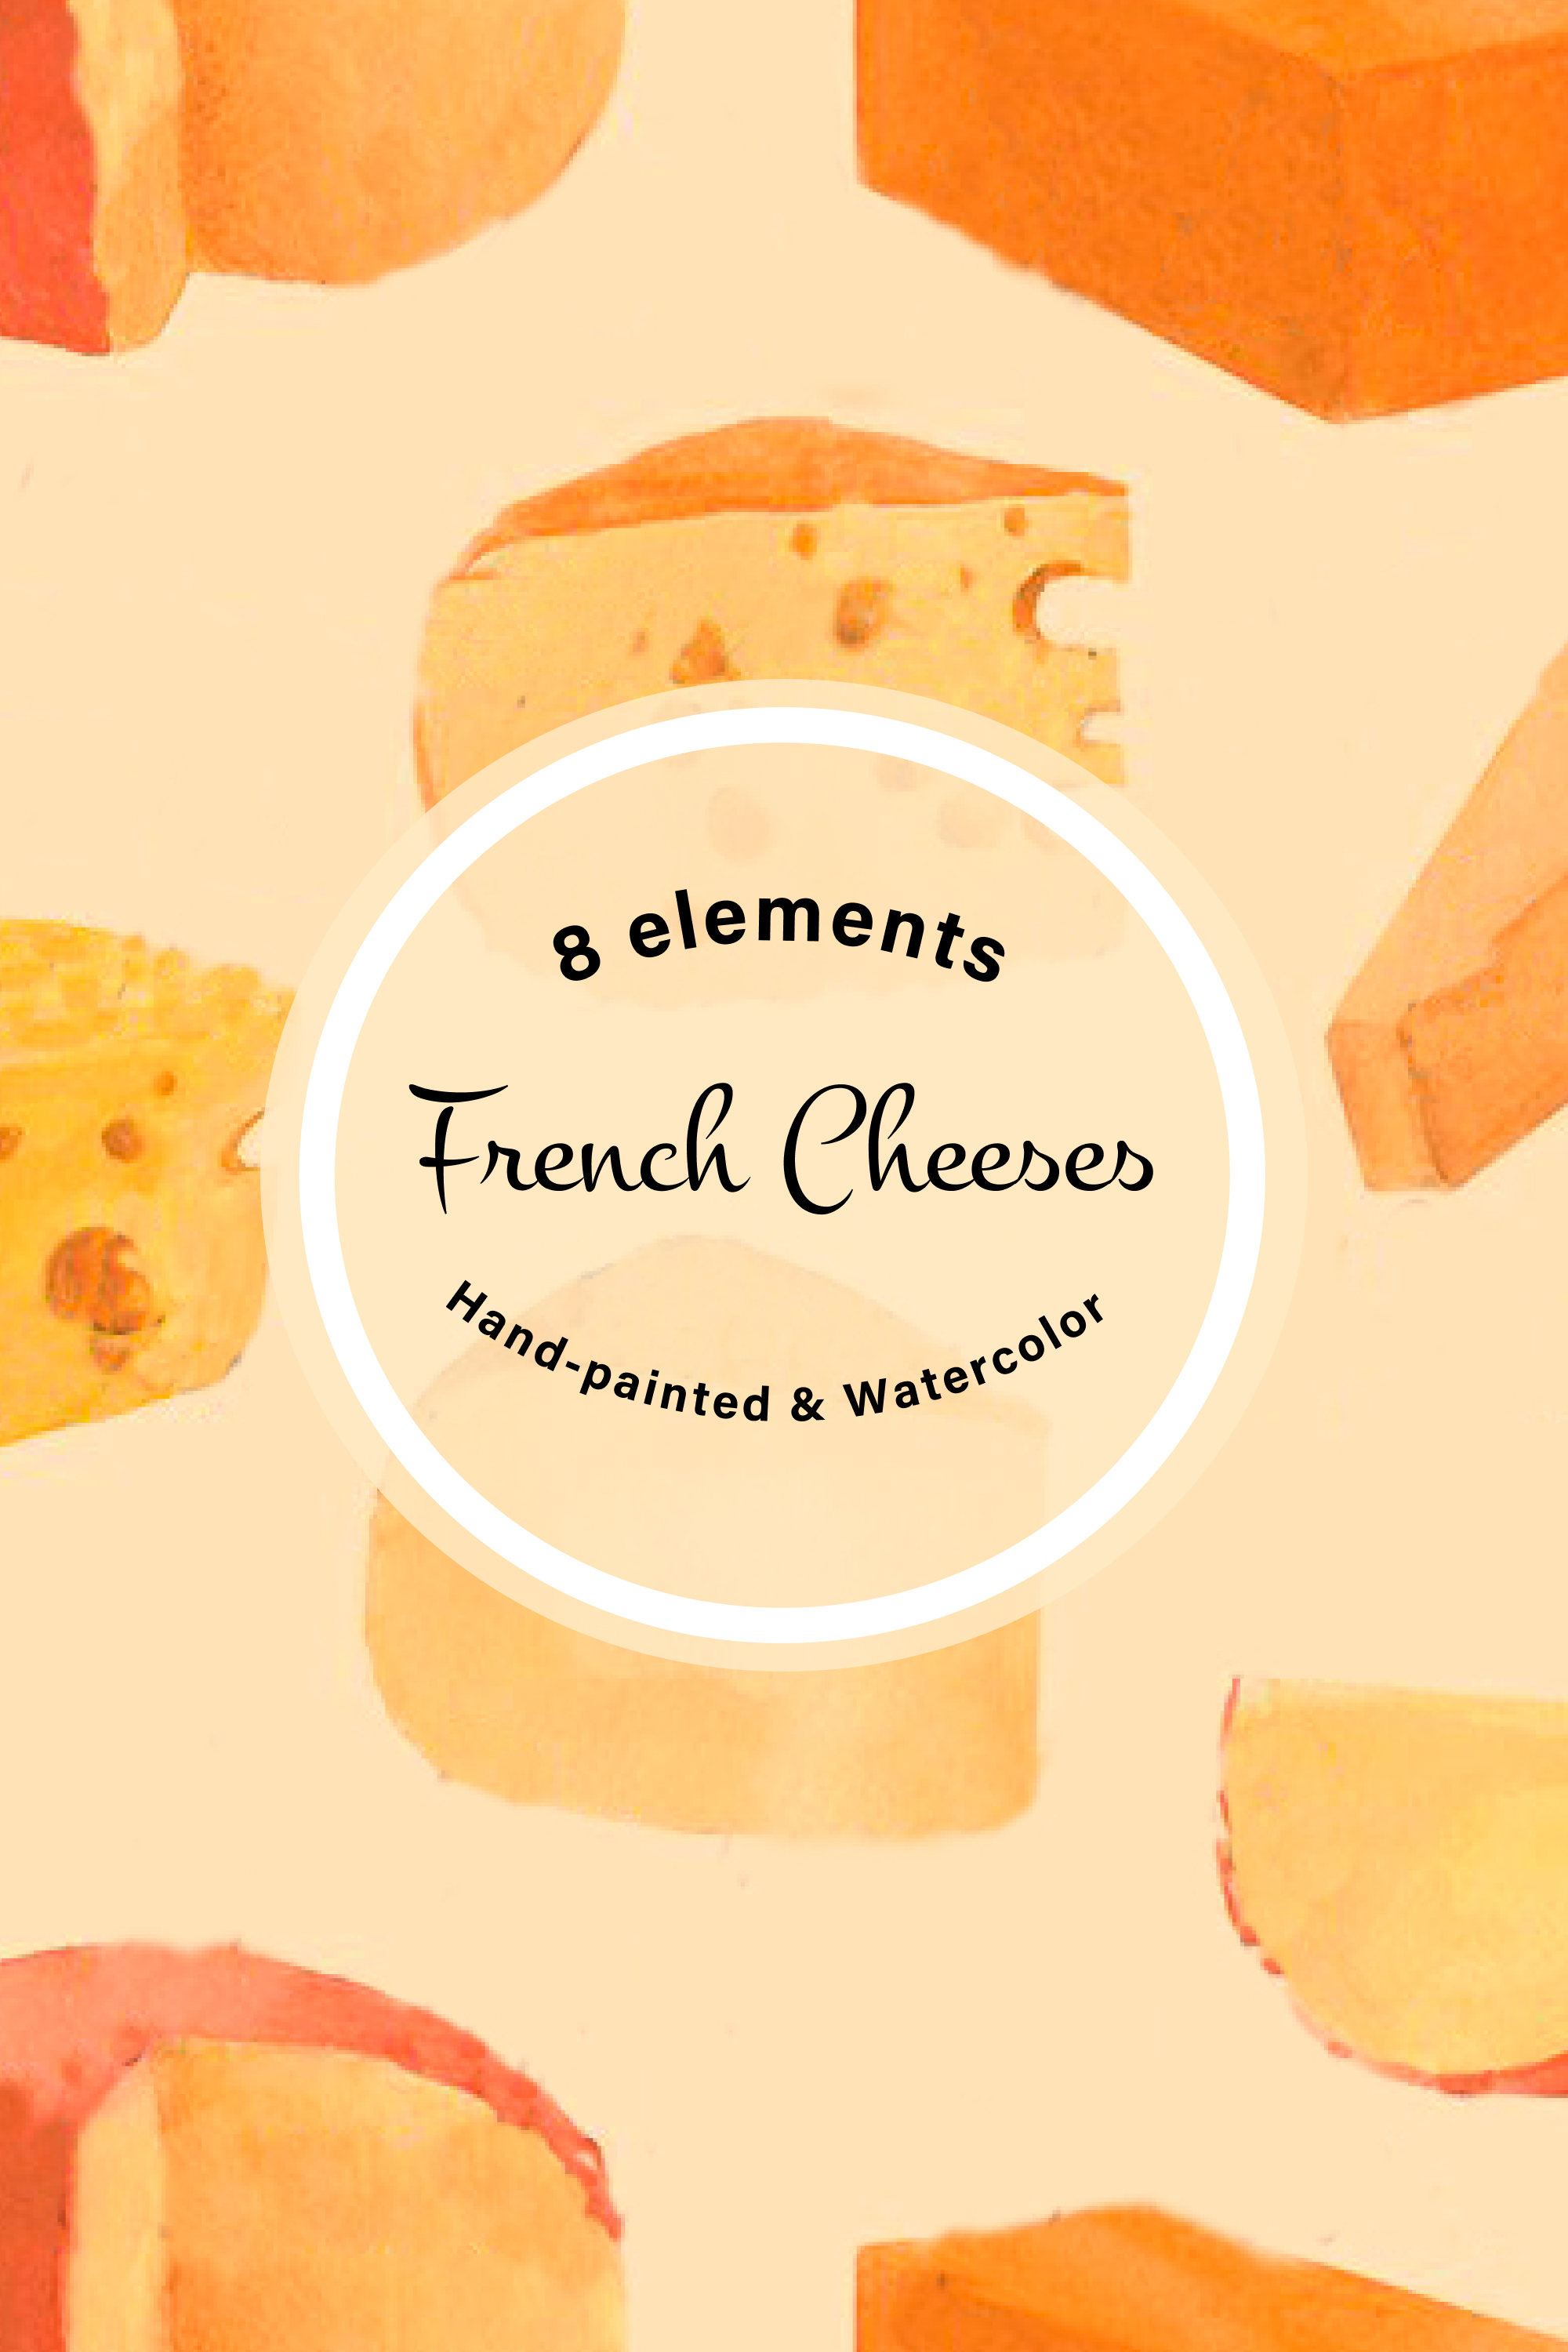 Collection of great images of french cheeses.